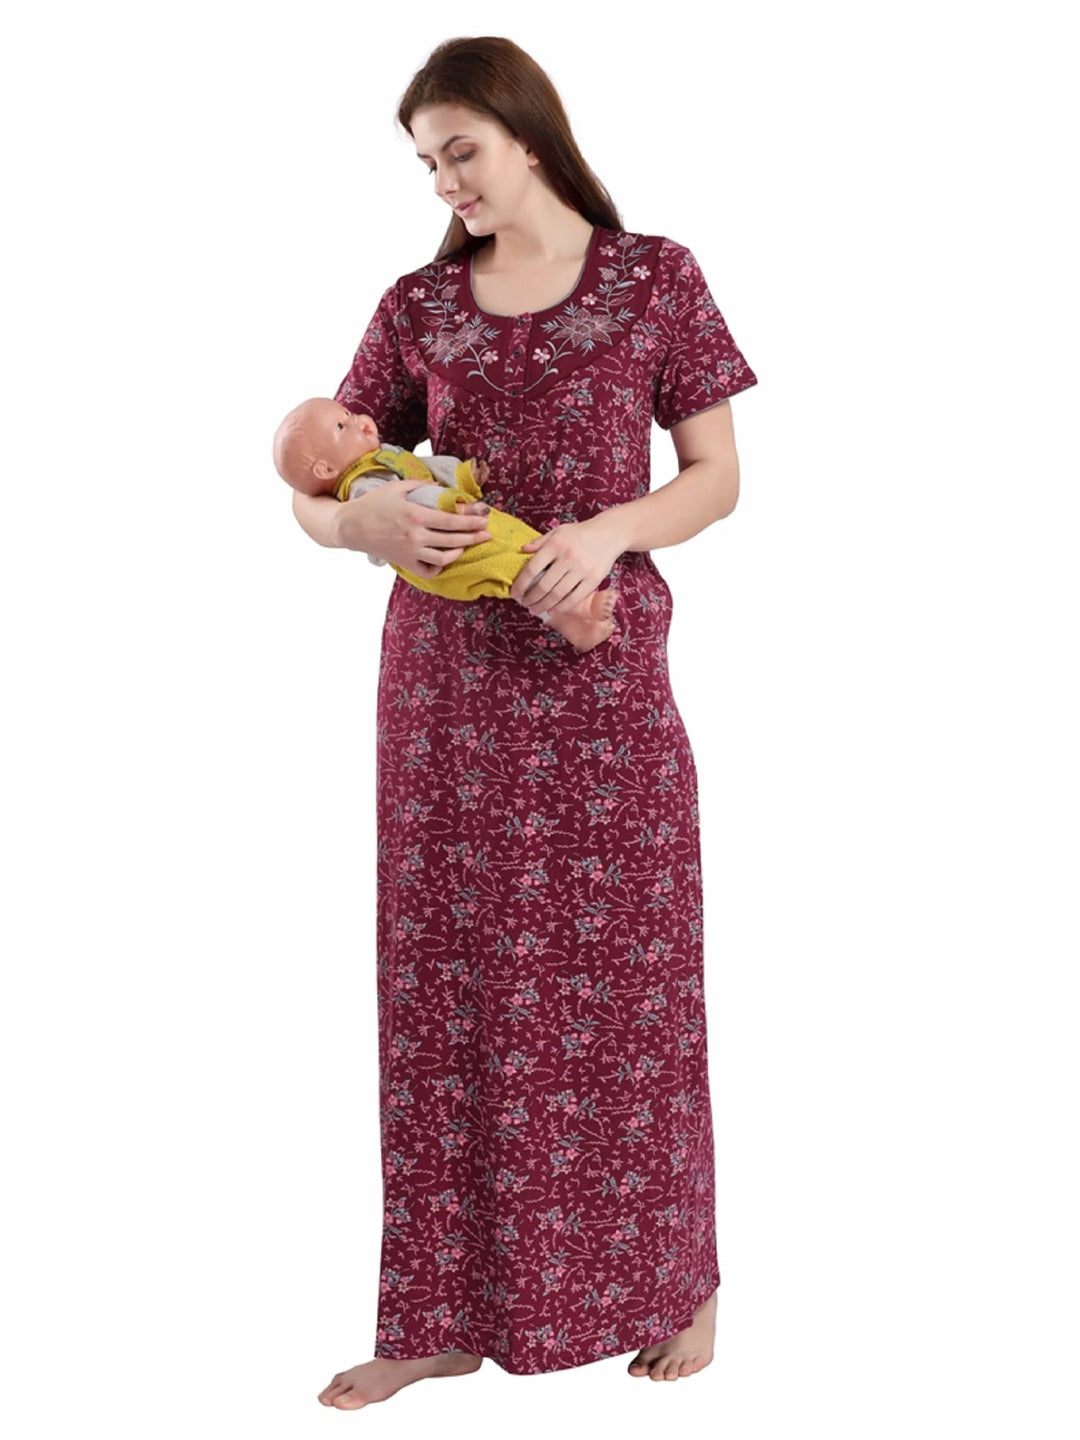  Maternity Long Nighty  Buy Maroon Red Hosiery Multipurpose Cotton Long Maxi Nighty |Night Gown| 9shines label- 9shines label 